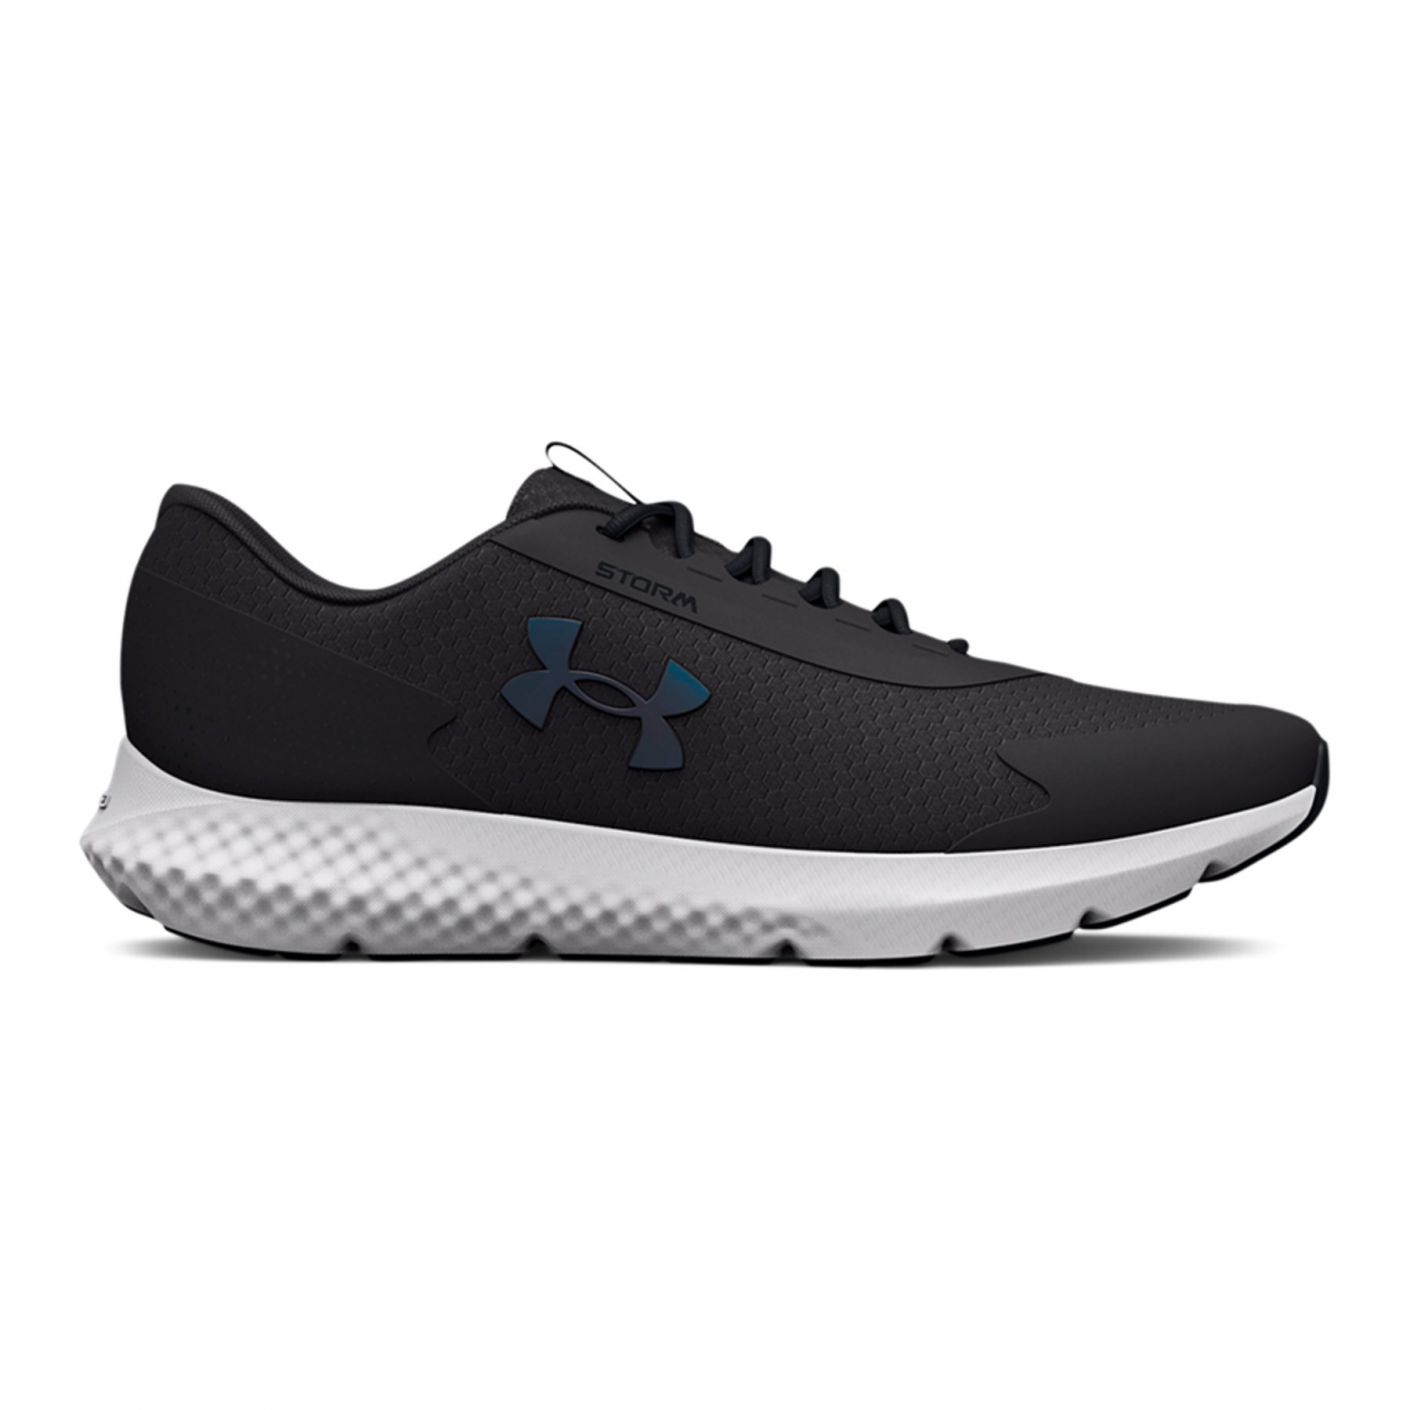 Under Armour Charged Rogue 3 Storm Nero/Bianco